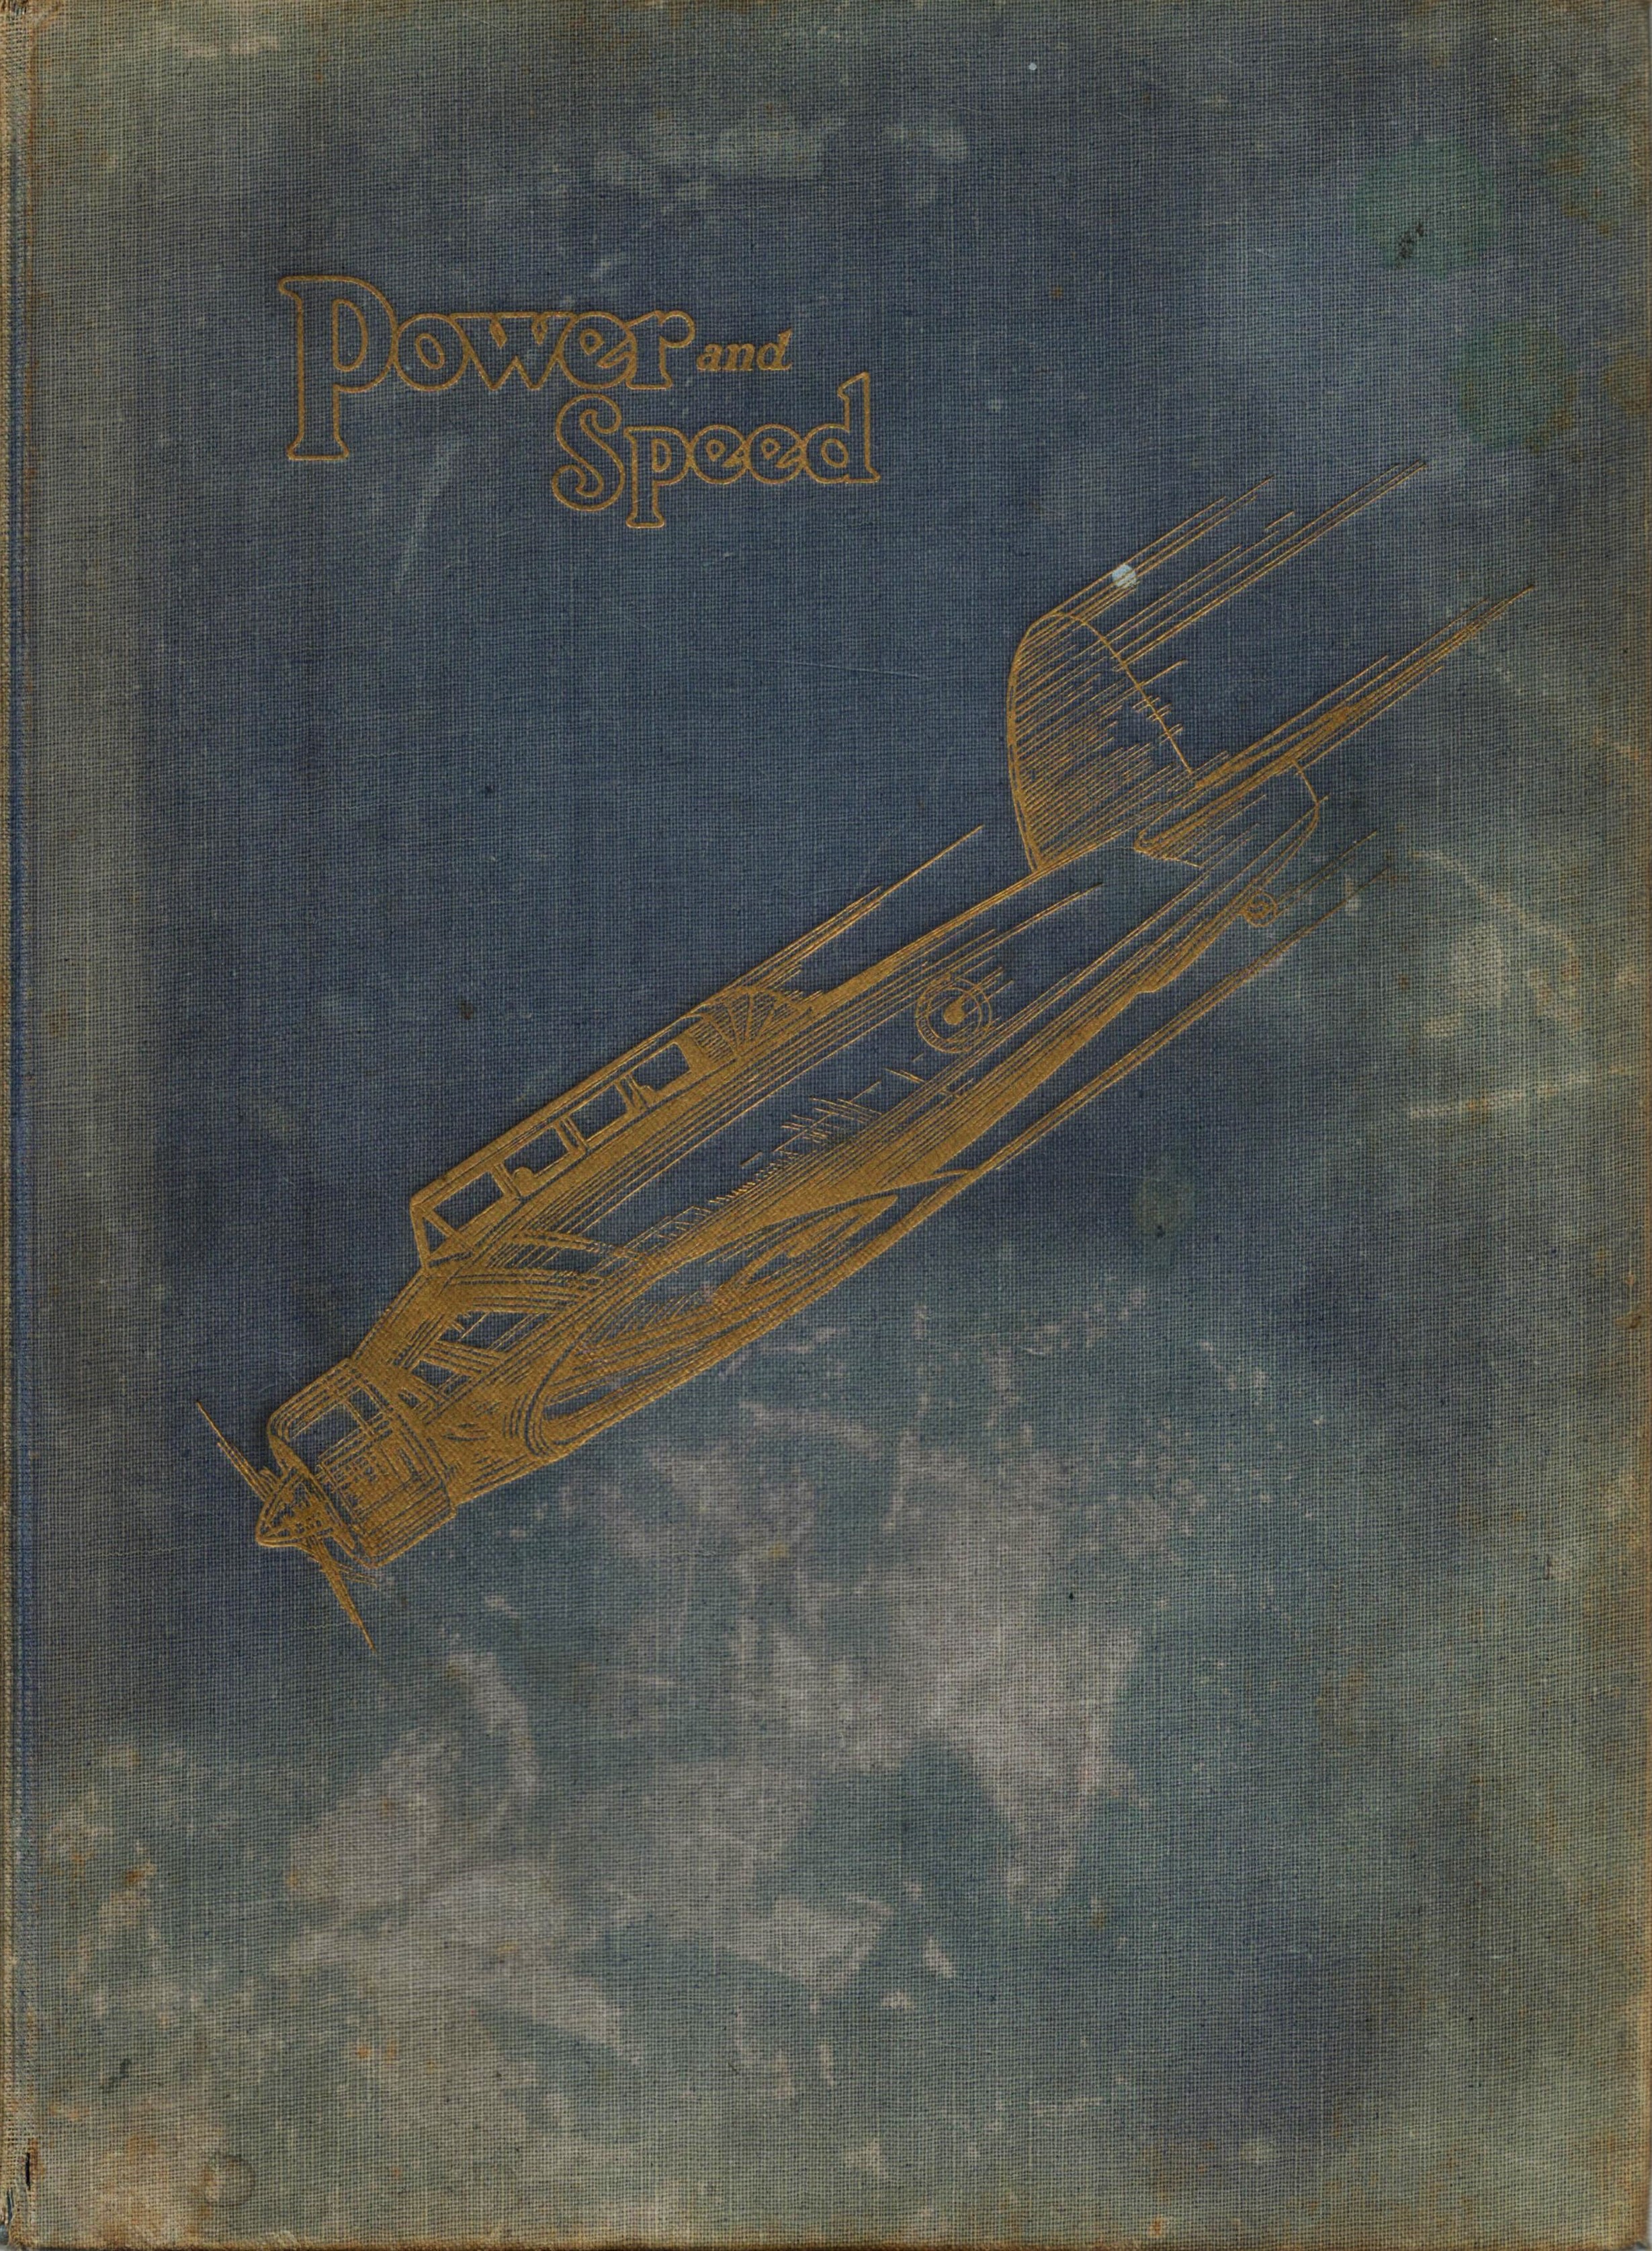 Power and Speed - The Story of the Internal Combustion Engine on Land, at Sea and in the Air